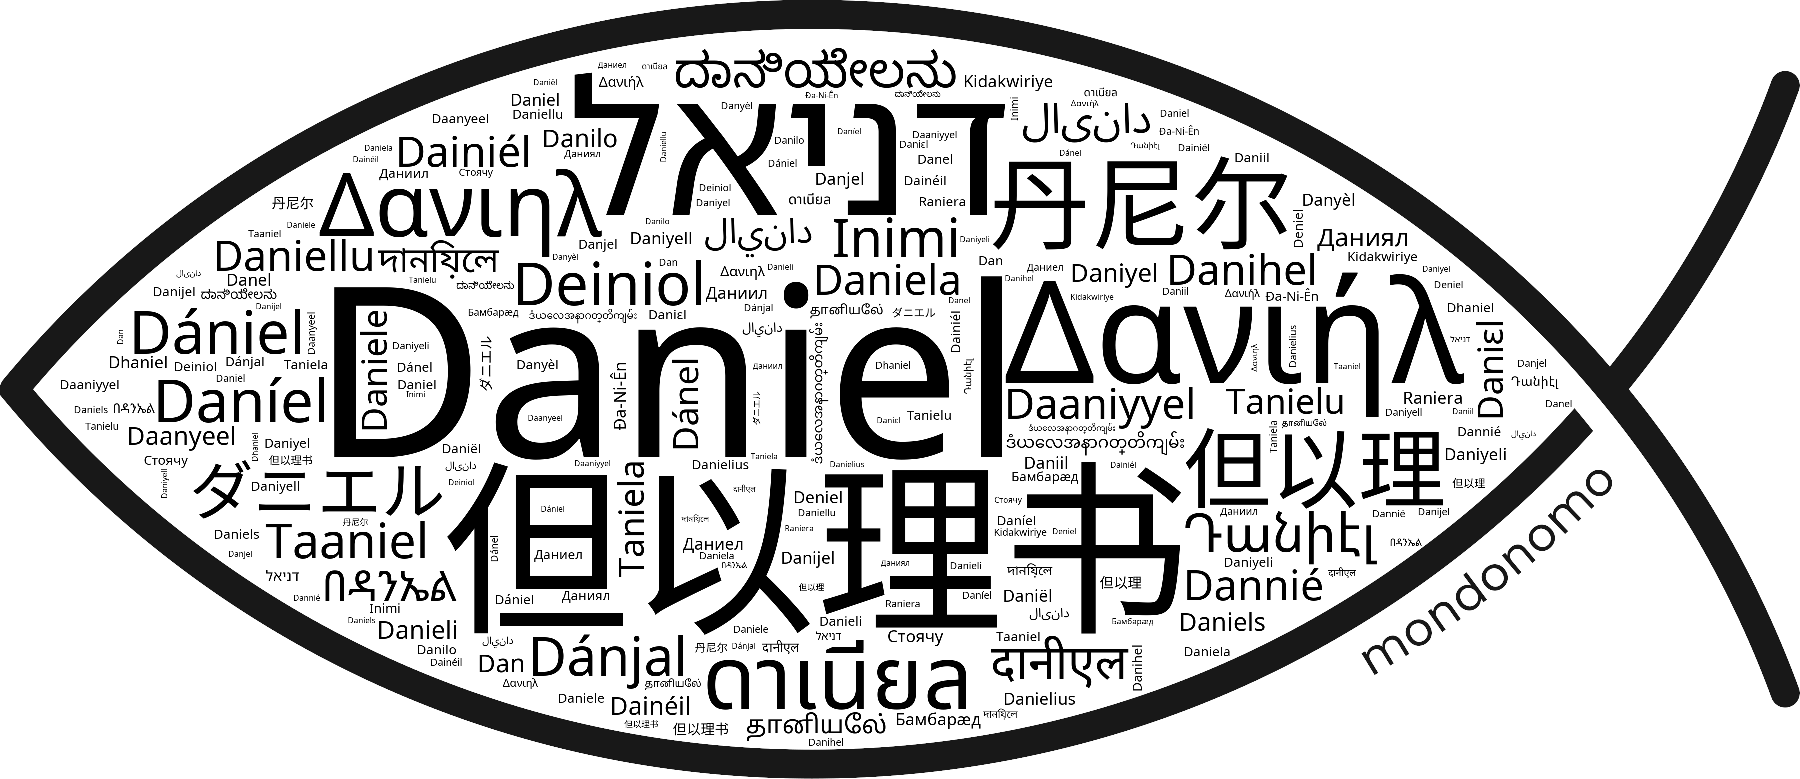 Name Daniel in the world's Bibles